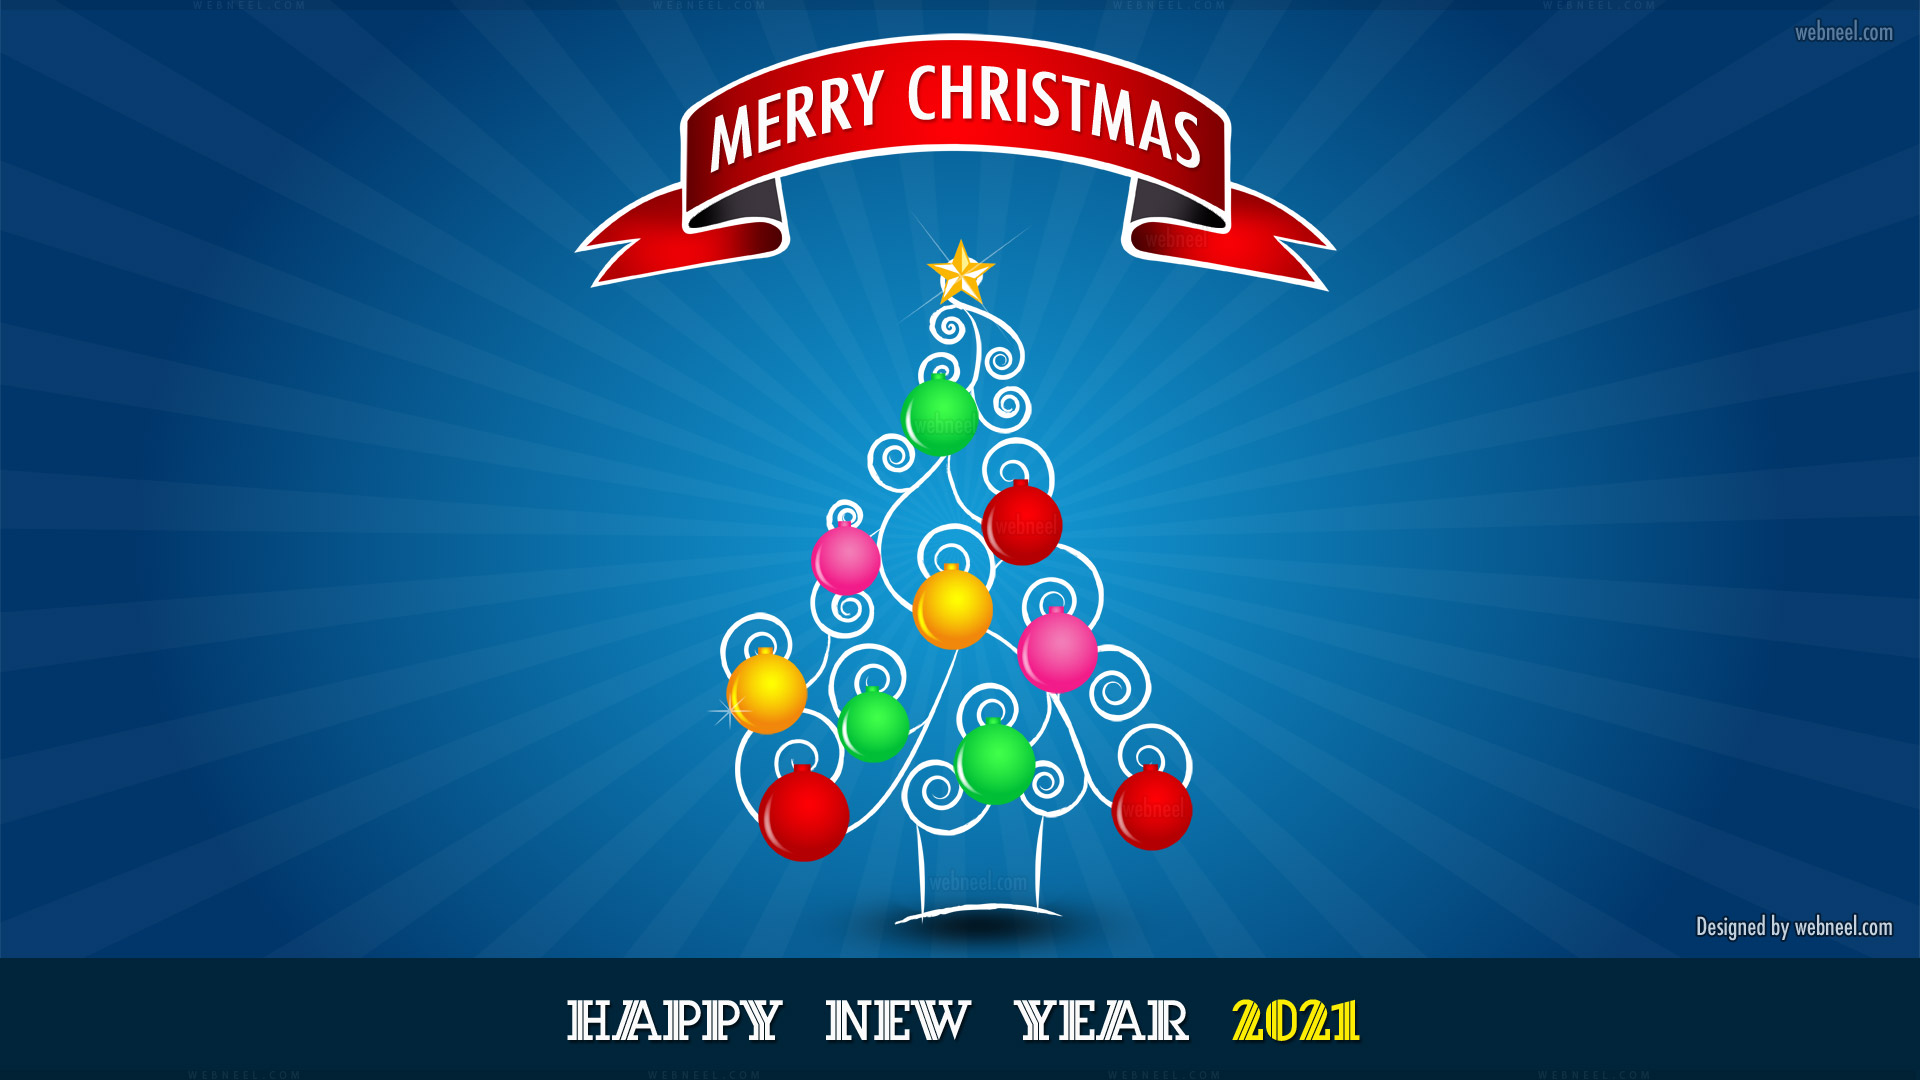 30 Merry Christmas Wallpapers and